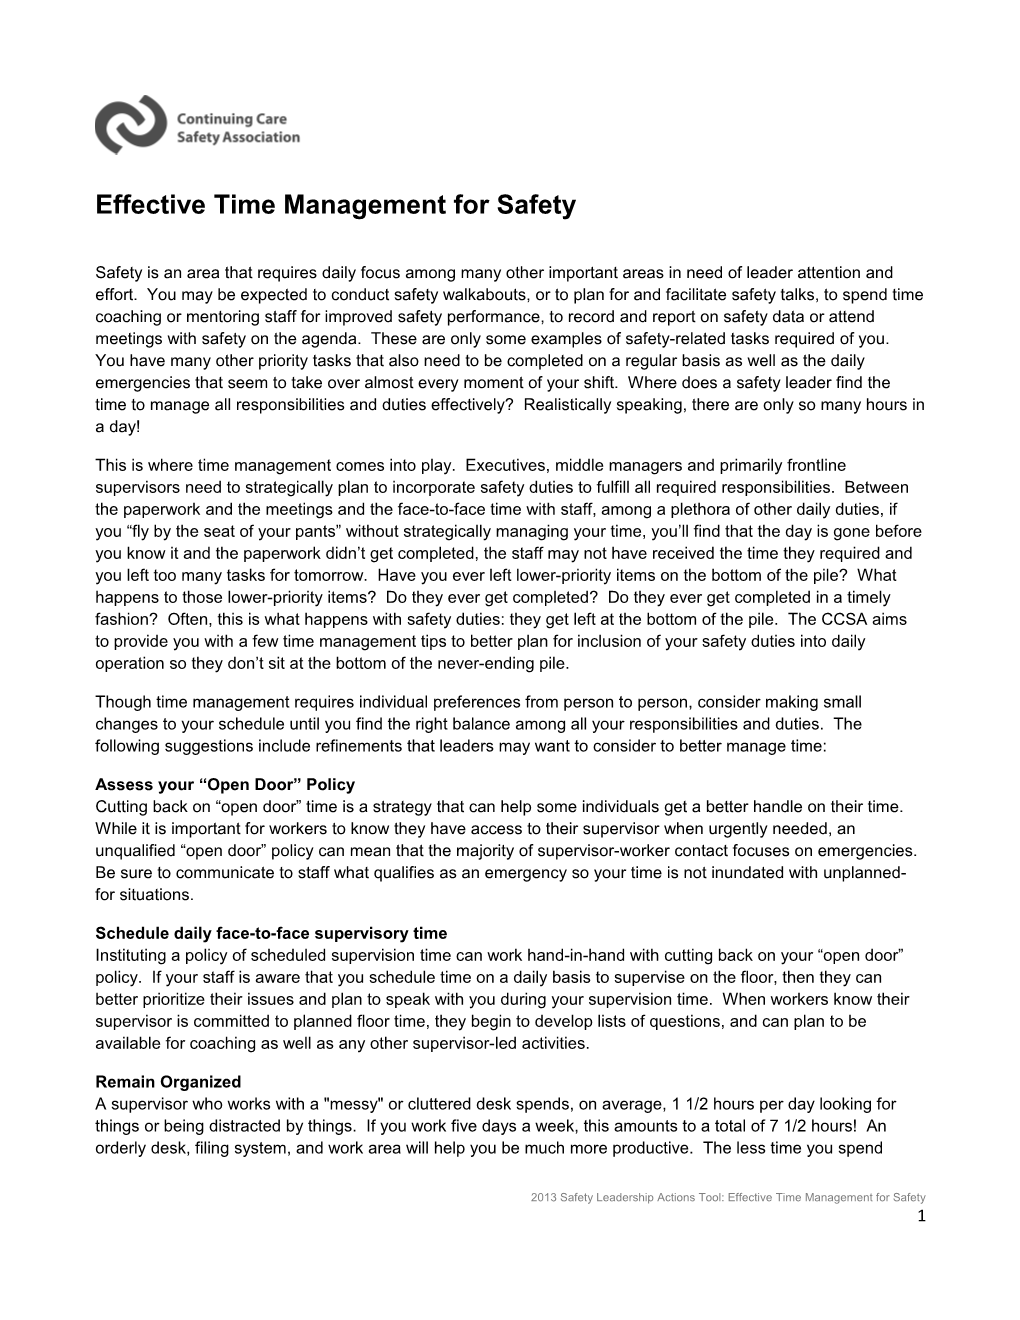 Effective Time Management for Safety